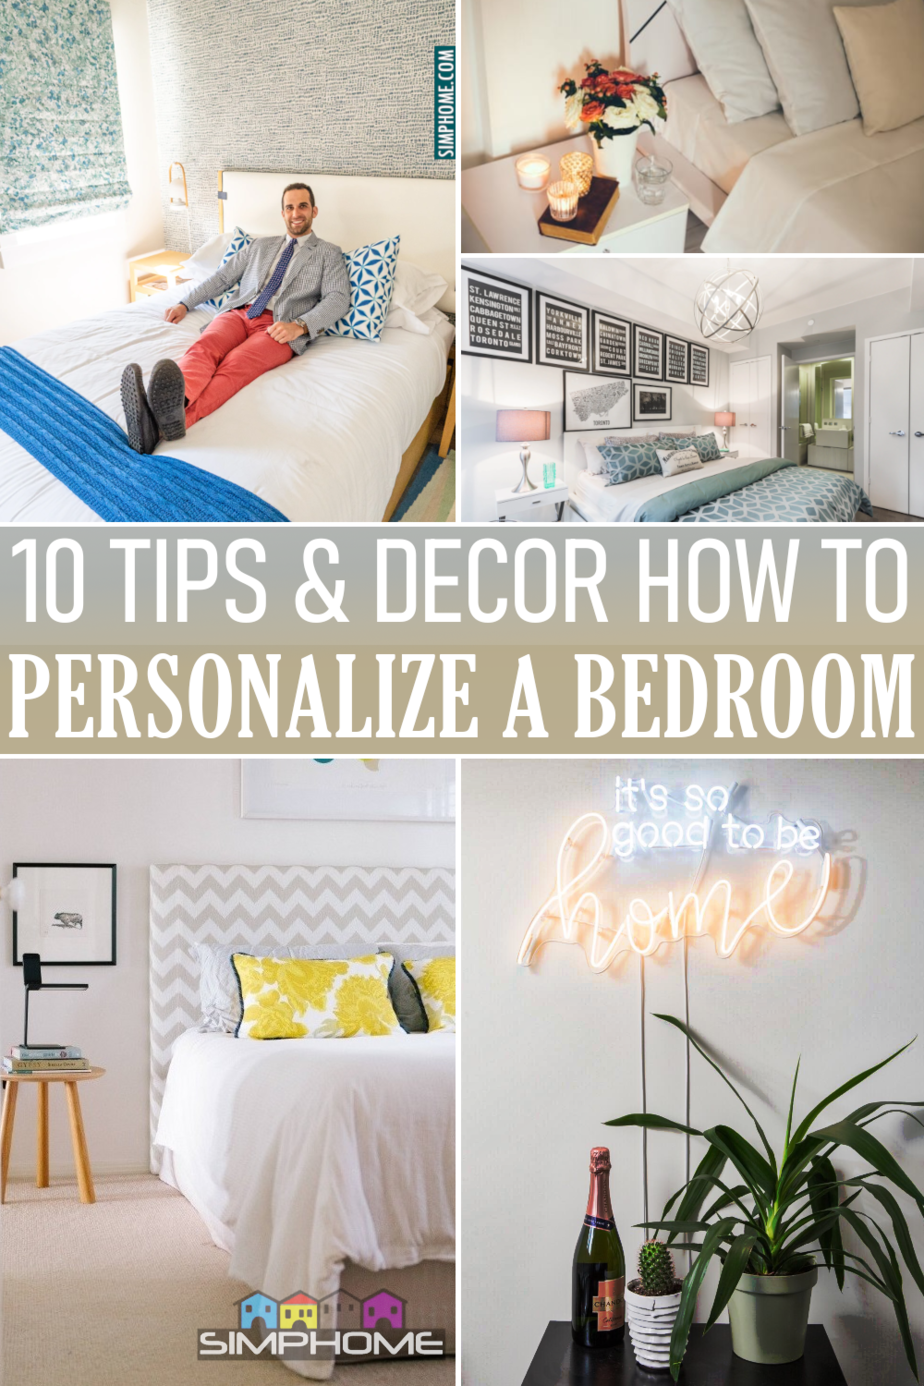 10 Ideas how to personalize bedroom via Simphome.comFeatured